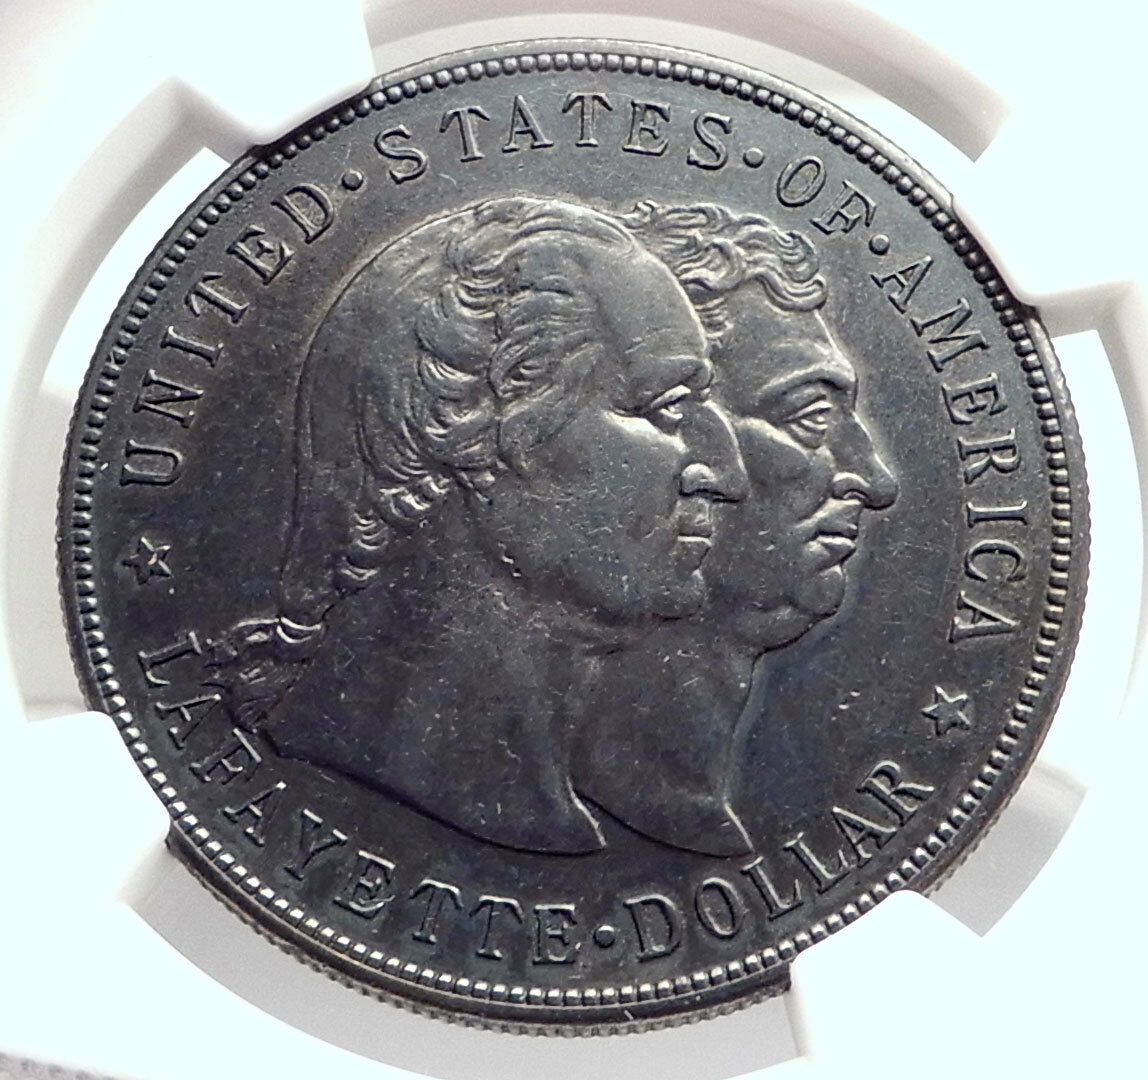 1900 French US Revolutionary War HERO LAFAYETTE Silver Dollar Coin NGC i73346